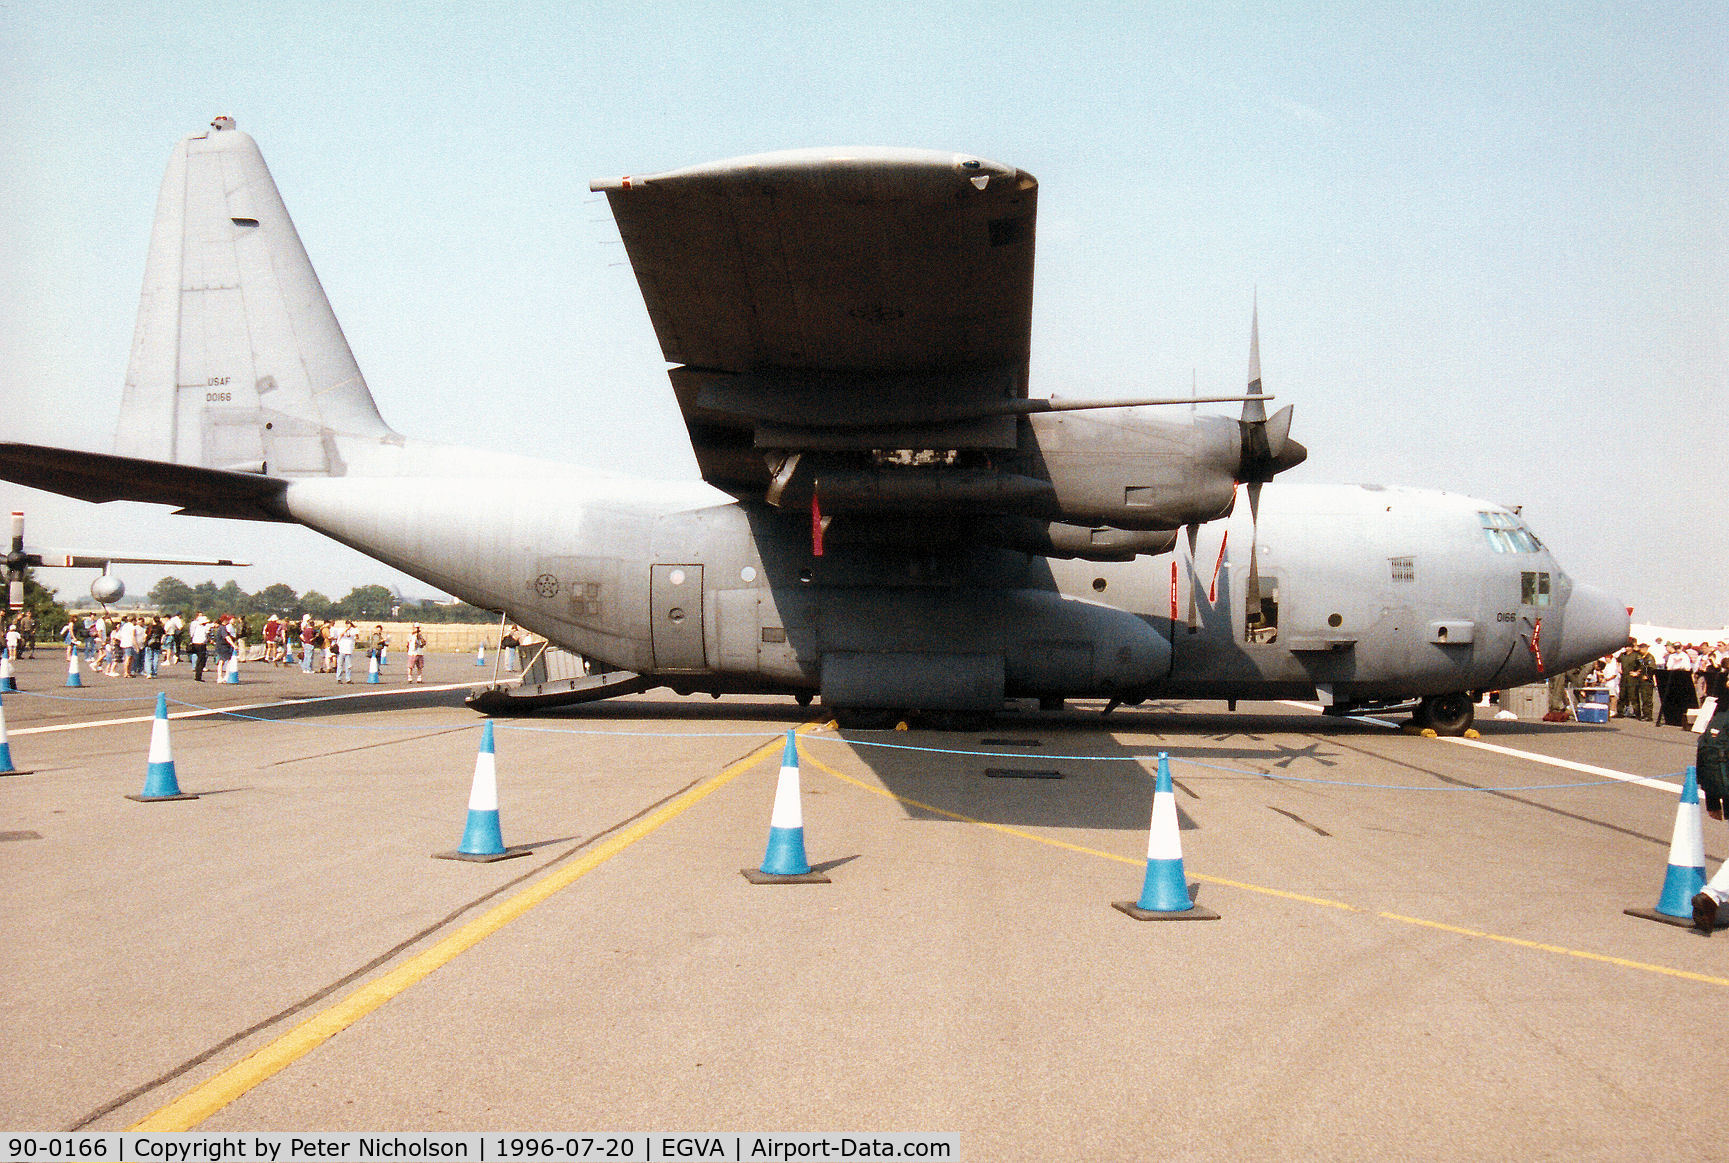 90-0166, 1990 Lockheed AC-130U Spooky II C/N 382-5261, AC-130U Hercules named Hellraiser of 4th Special Operations Squadron on display at the 1996 Royal Intnl Air Tattoo at RAF Fairford.